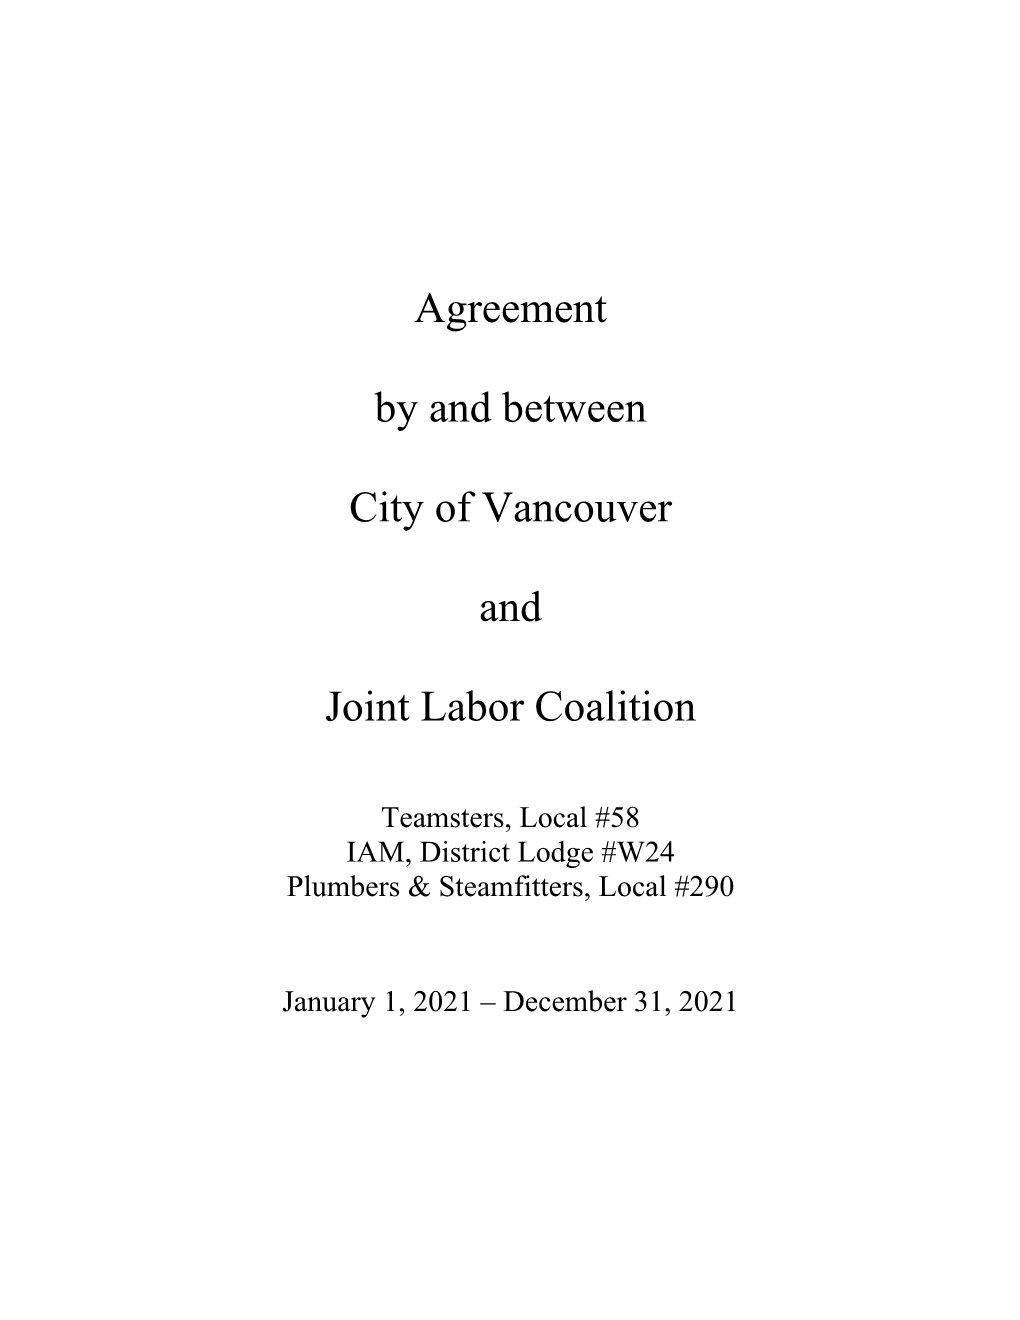 Agreement by and Between City of Vancouver and Joint Labor Coalition